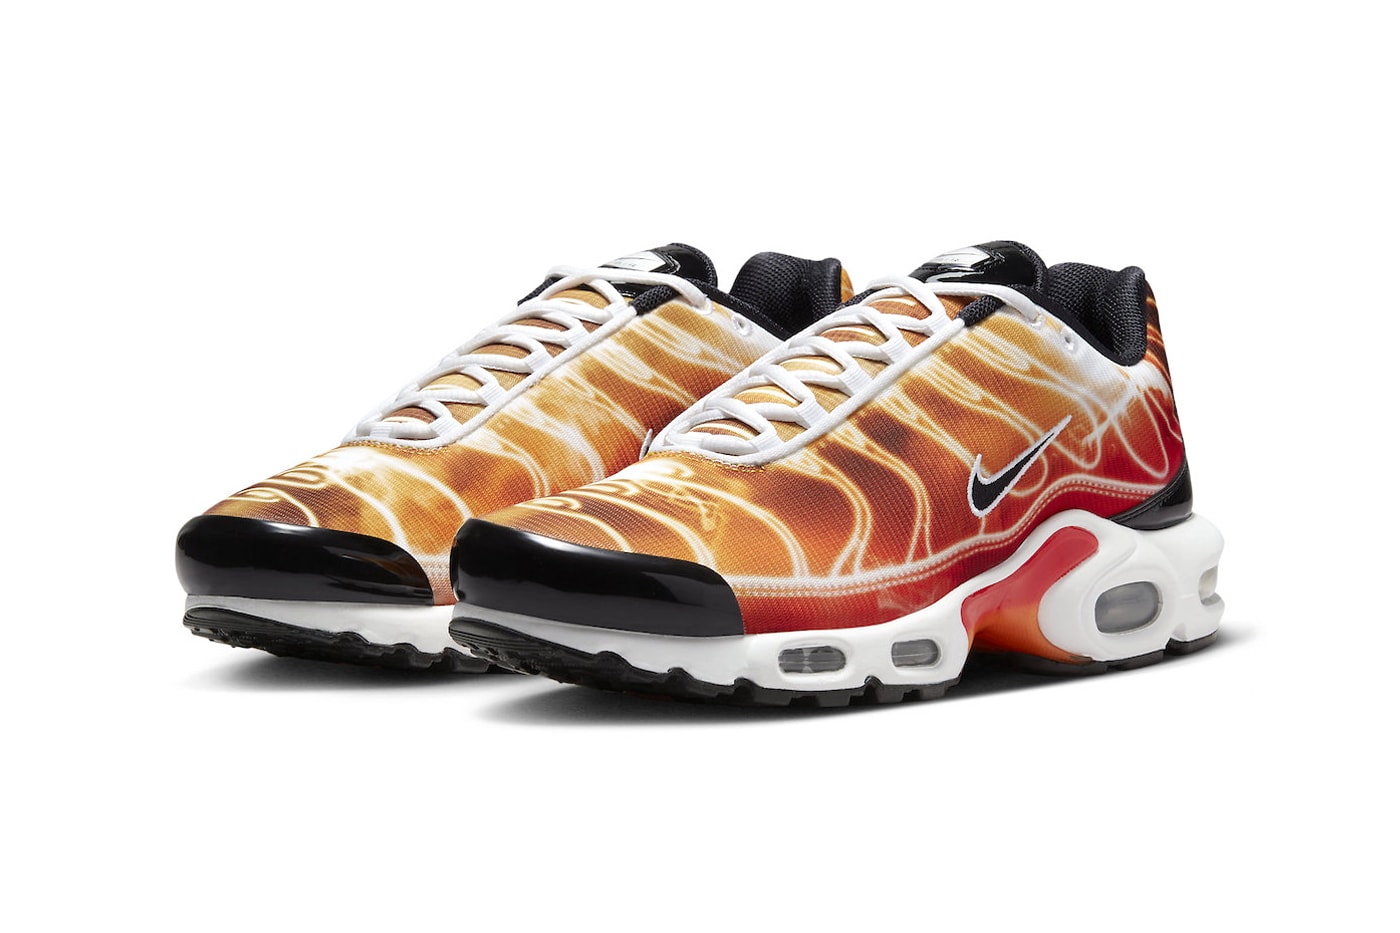 Nike Air Max Plus "Light Photography"  Receives a Fiery Makeover DZ3531-600 release info sean mcdowell technical shoe nike swoosh 